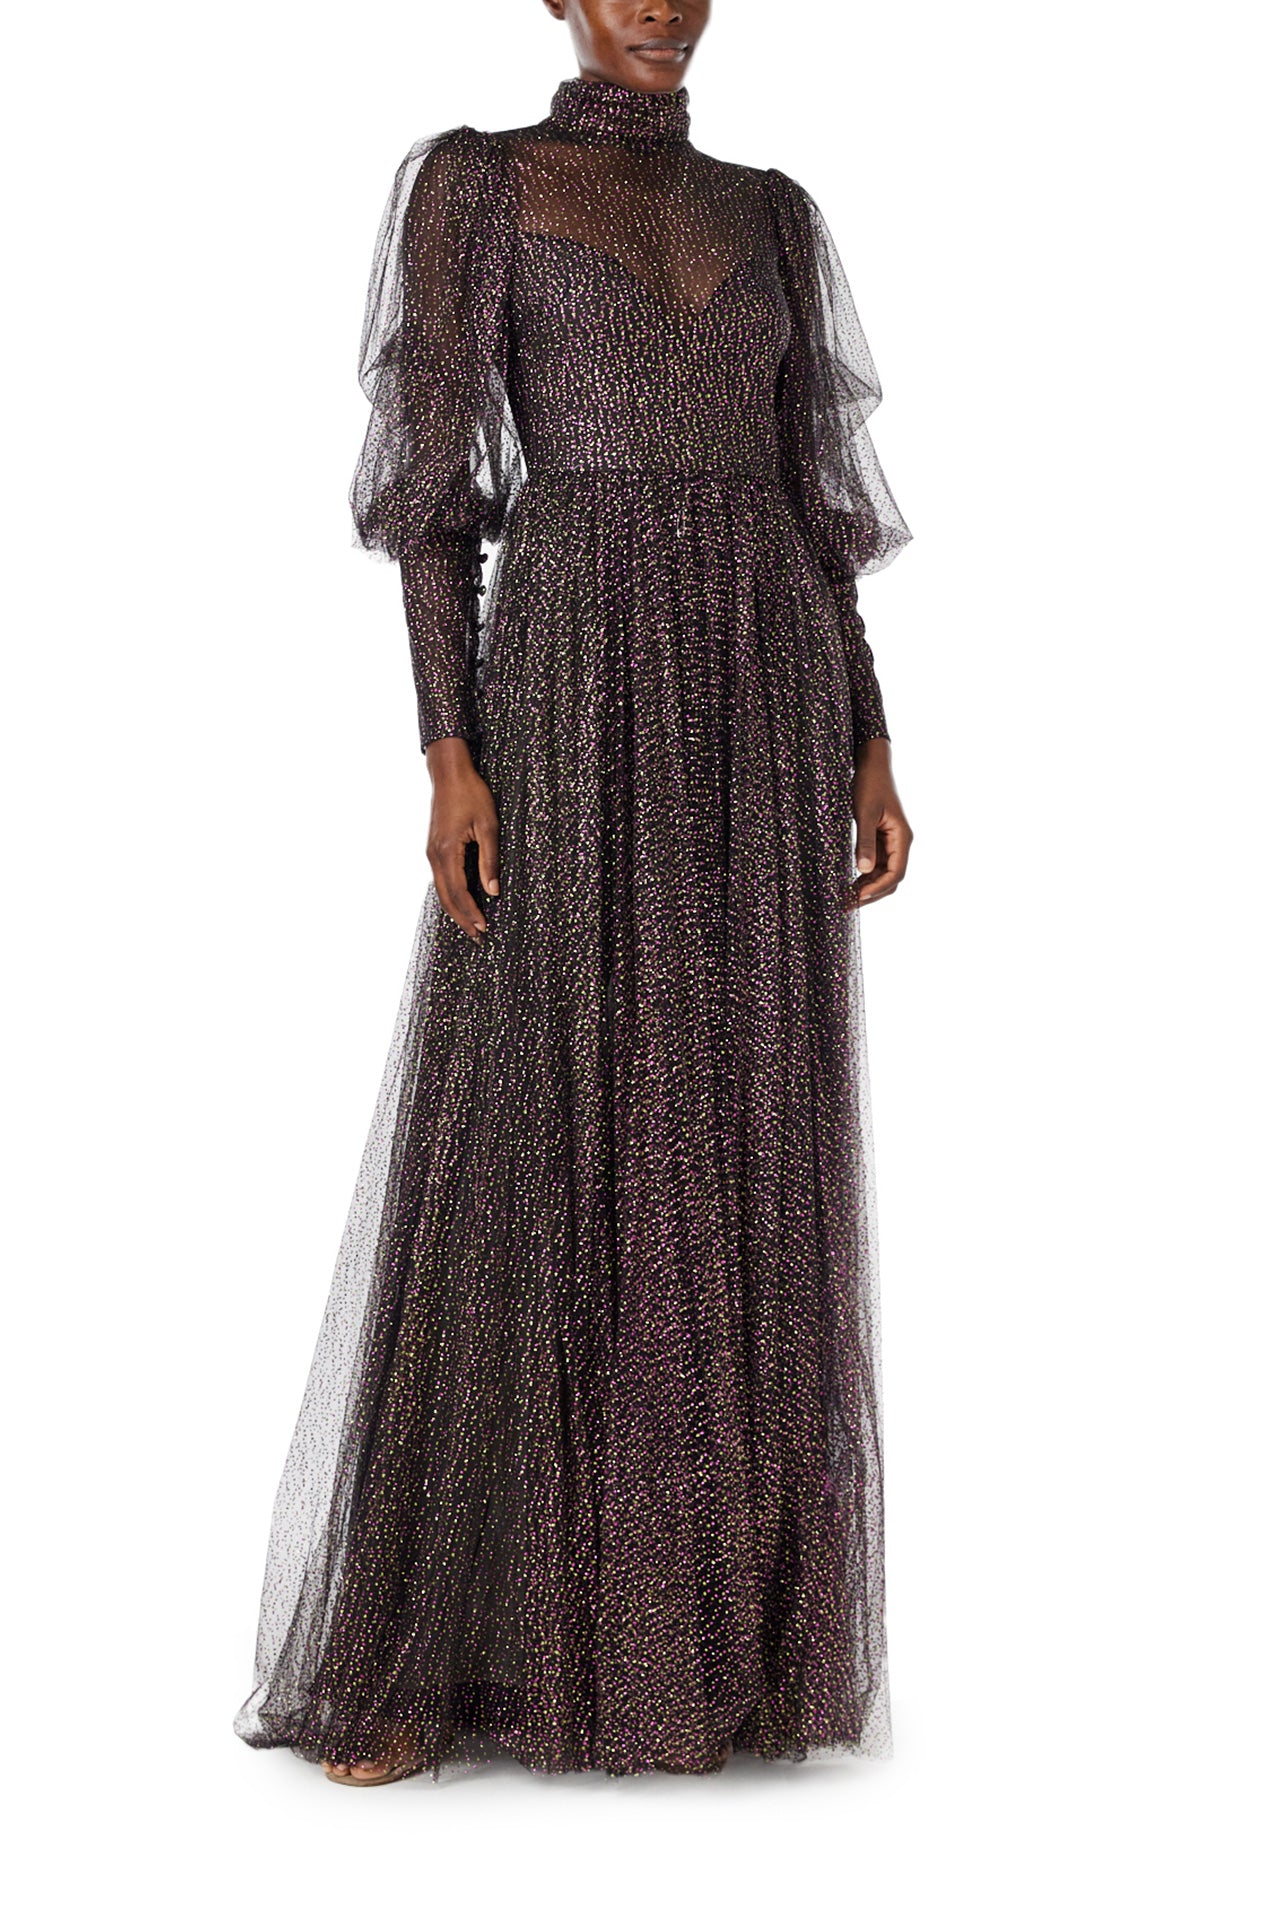 Monique Lhuillier Spring 2024 long sleeve gown with high neck in noir and multi colored glitter tulle fabric - front two.